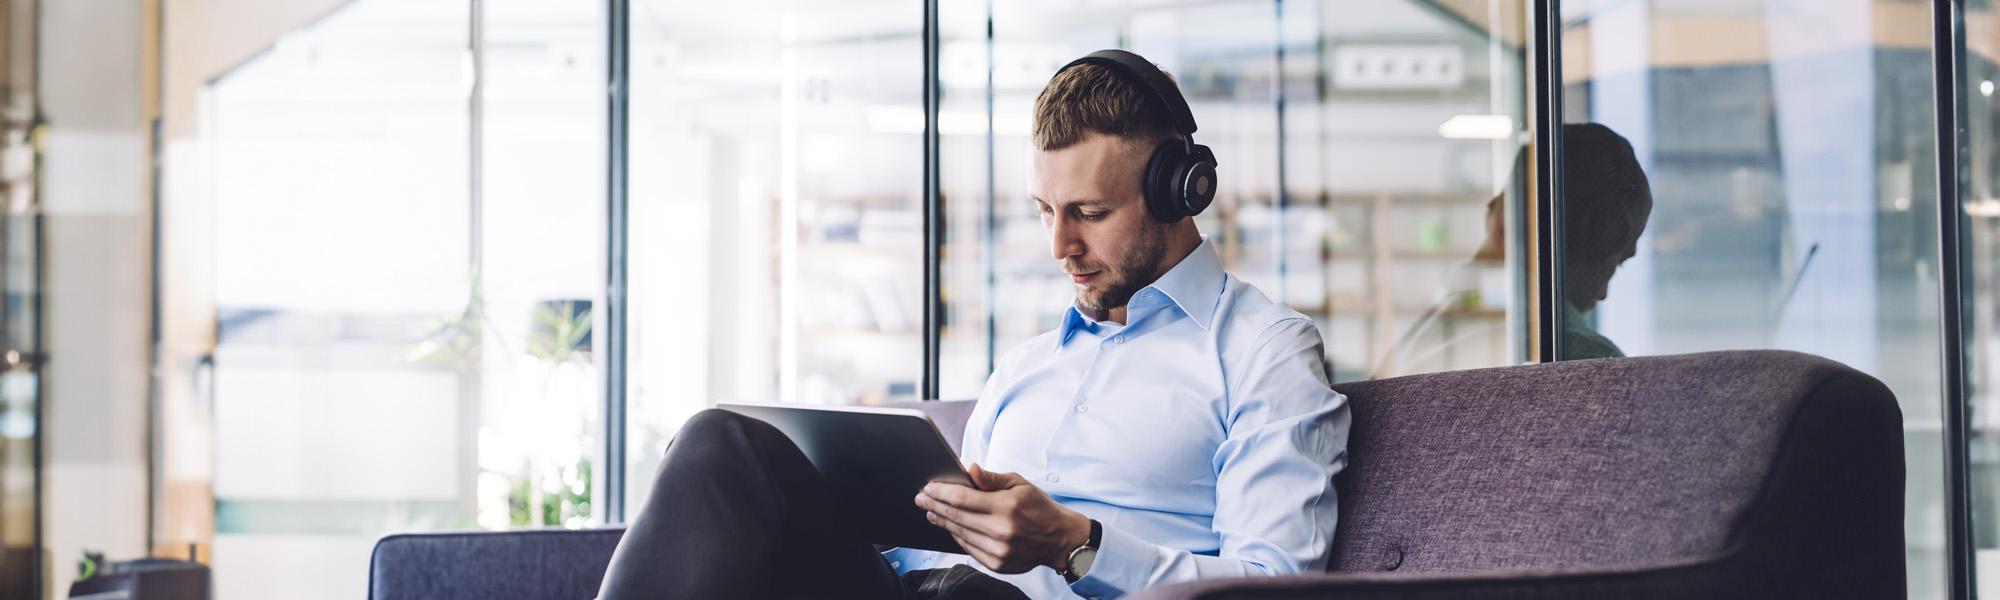 man with headphones sitting in office and using tablet